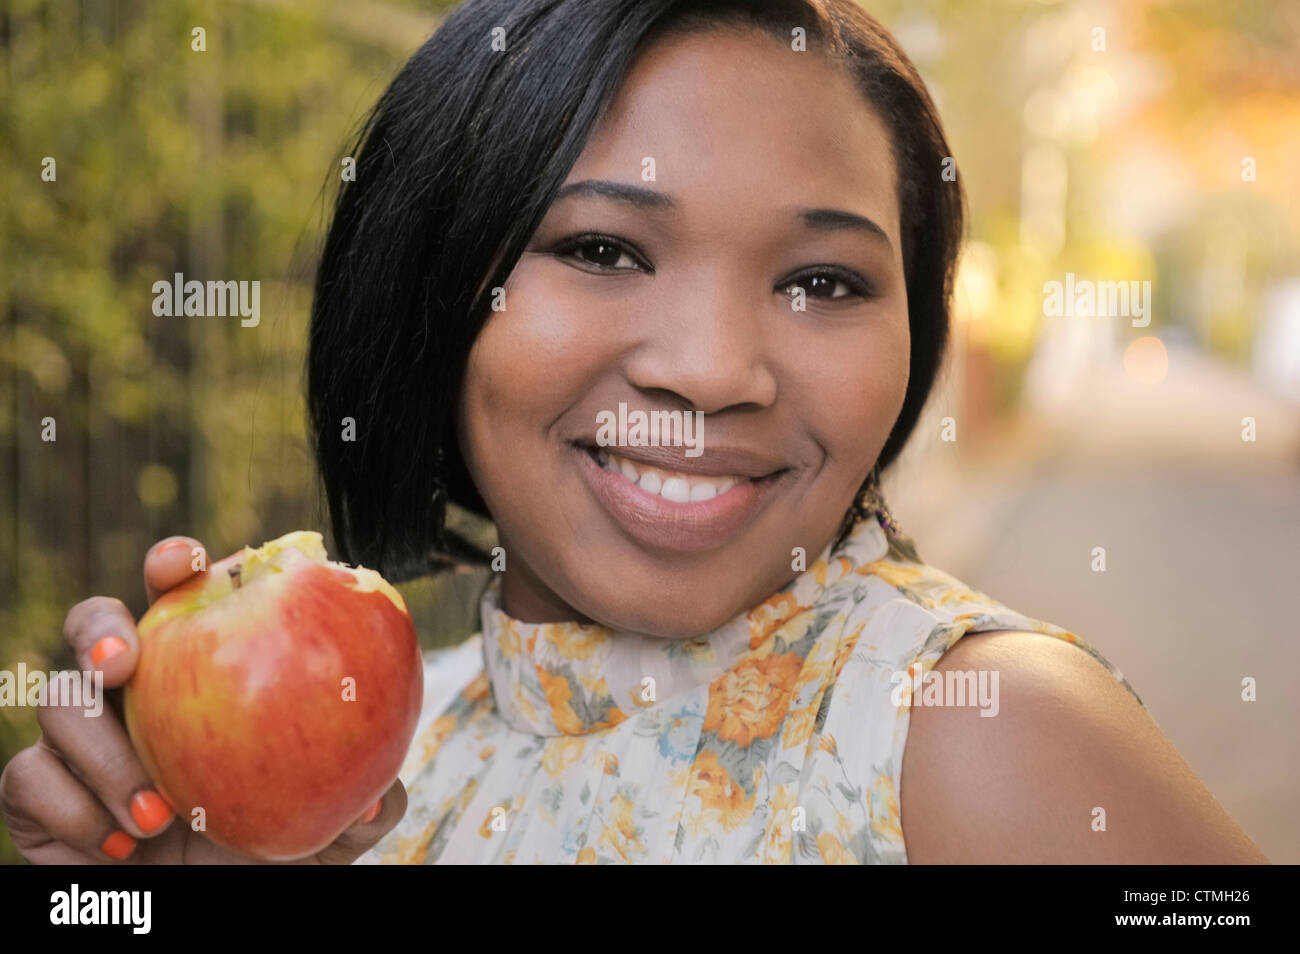 Young woman smiling eating an apple, Cape Town, Western Cape Province, South Africa Stock Photo